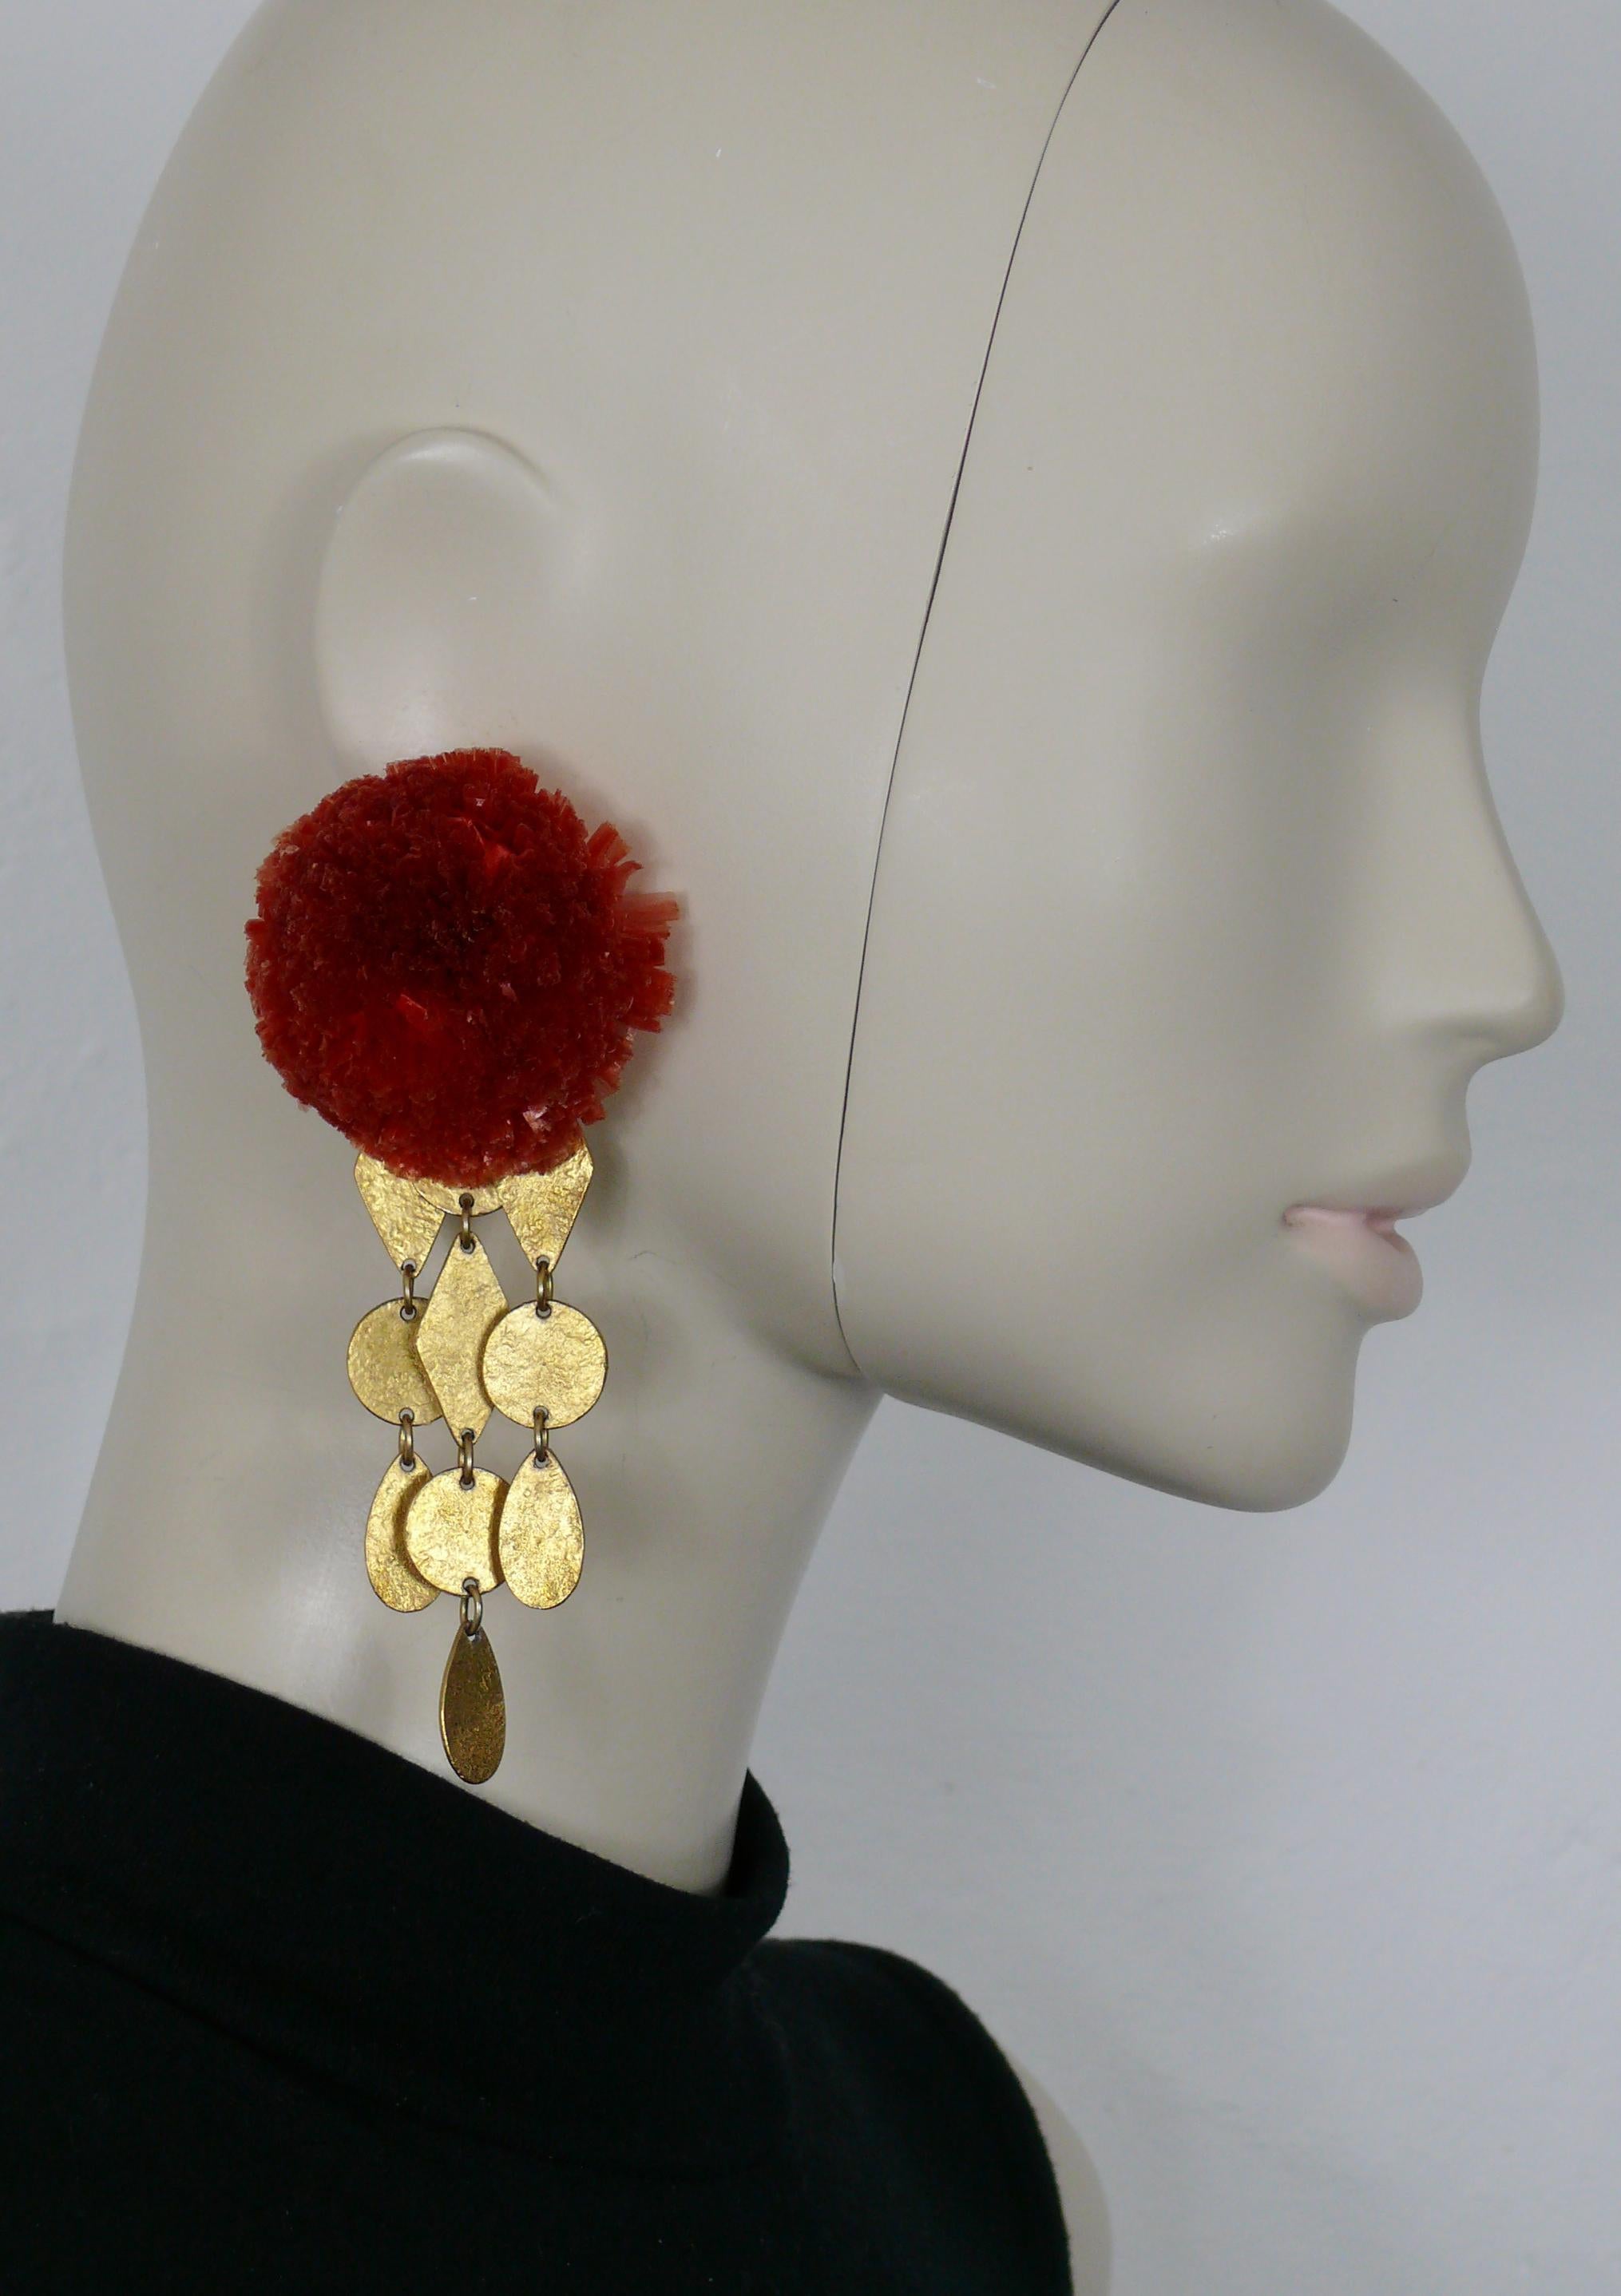 YVES SAINT LAURENT vintage gold toned dangling earrings (clip on) featuring a large coral color raffia pompom top and cascading textured charms.

Embossed YSL Made in France.

Indicative measurements : max. height approx. 12.5 cm (4.92 inches) /